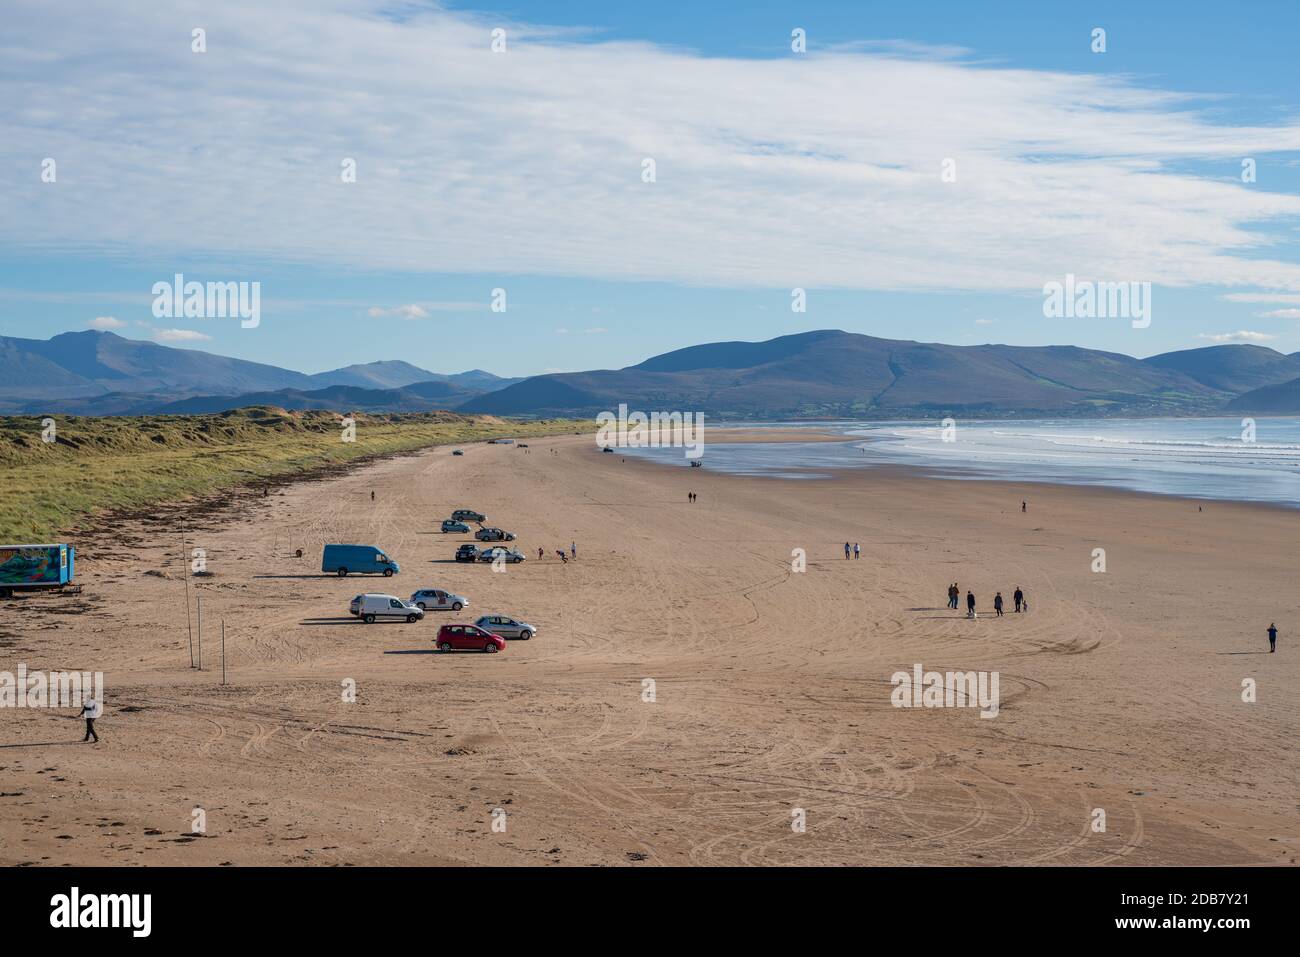 Parking on the spectacular 3 mile long Inch beach, near Dingle on the Wild Atlantic Way, a beautful scenic area on the West coast of Ireland. Stock Photo